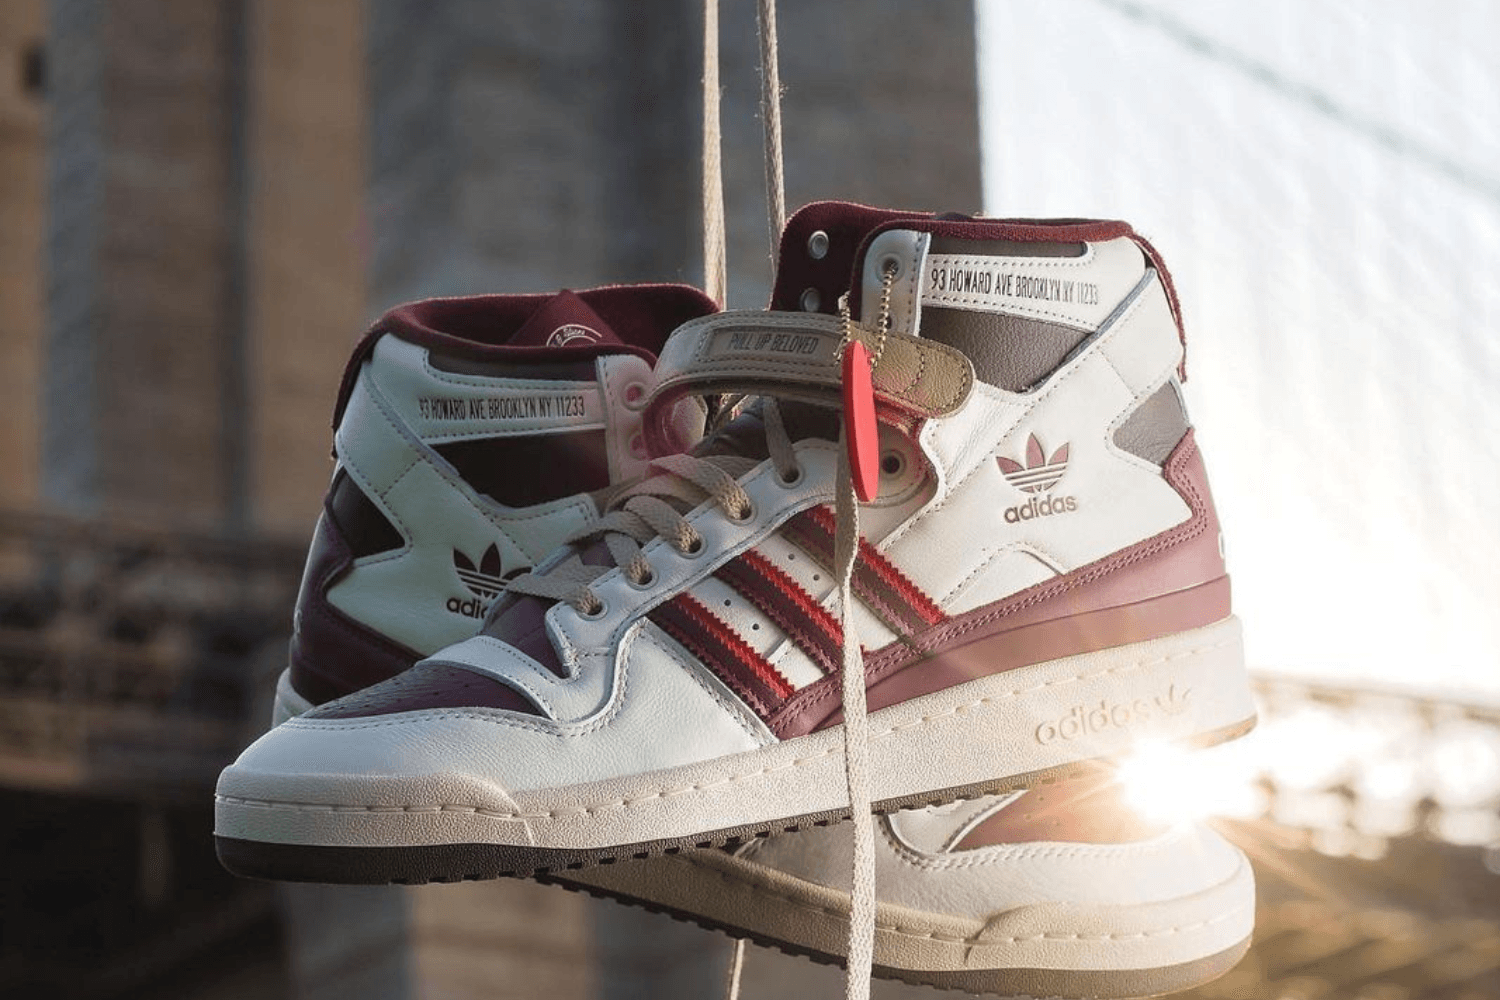 New York's Cuts & Slices gets its own adidas Forum High